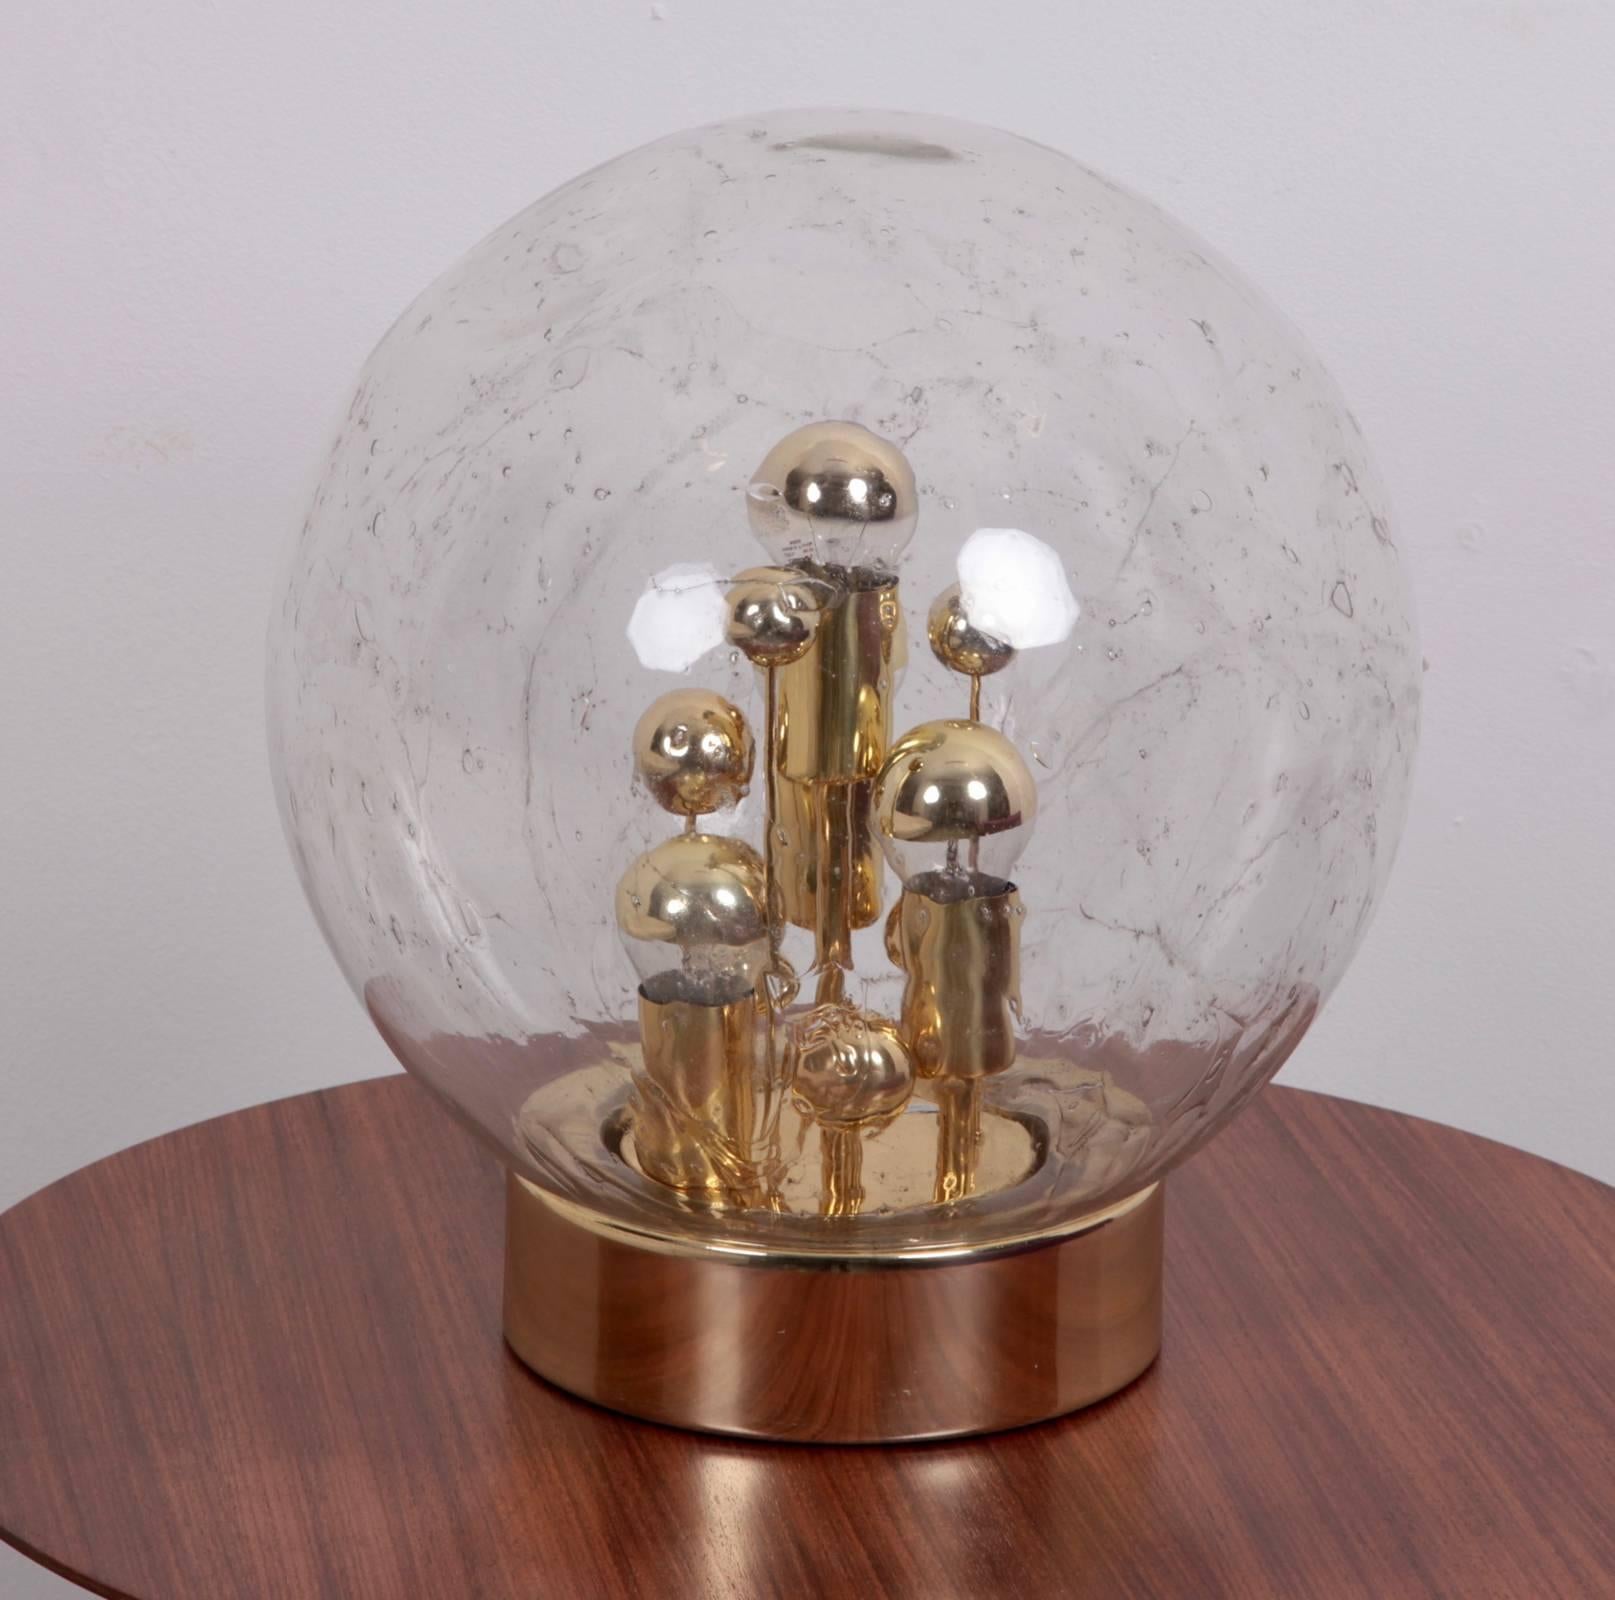 Very nice and huge handblown glass globe and gilt metal table lamp by German high end manufacturer Doria. Four x Model A / E27 bulbs.
To be on the the safe side, the lamp should be checked locally by a specialist concerning local requirements.

